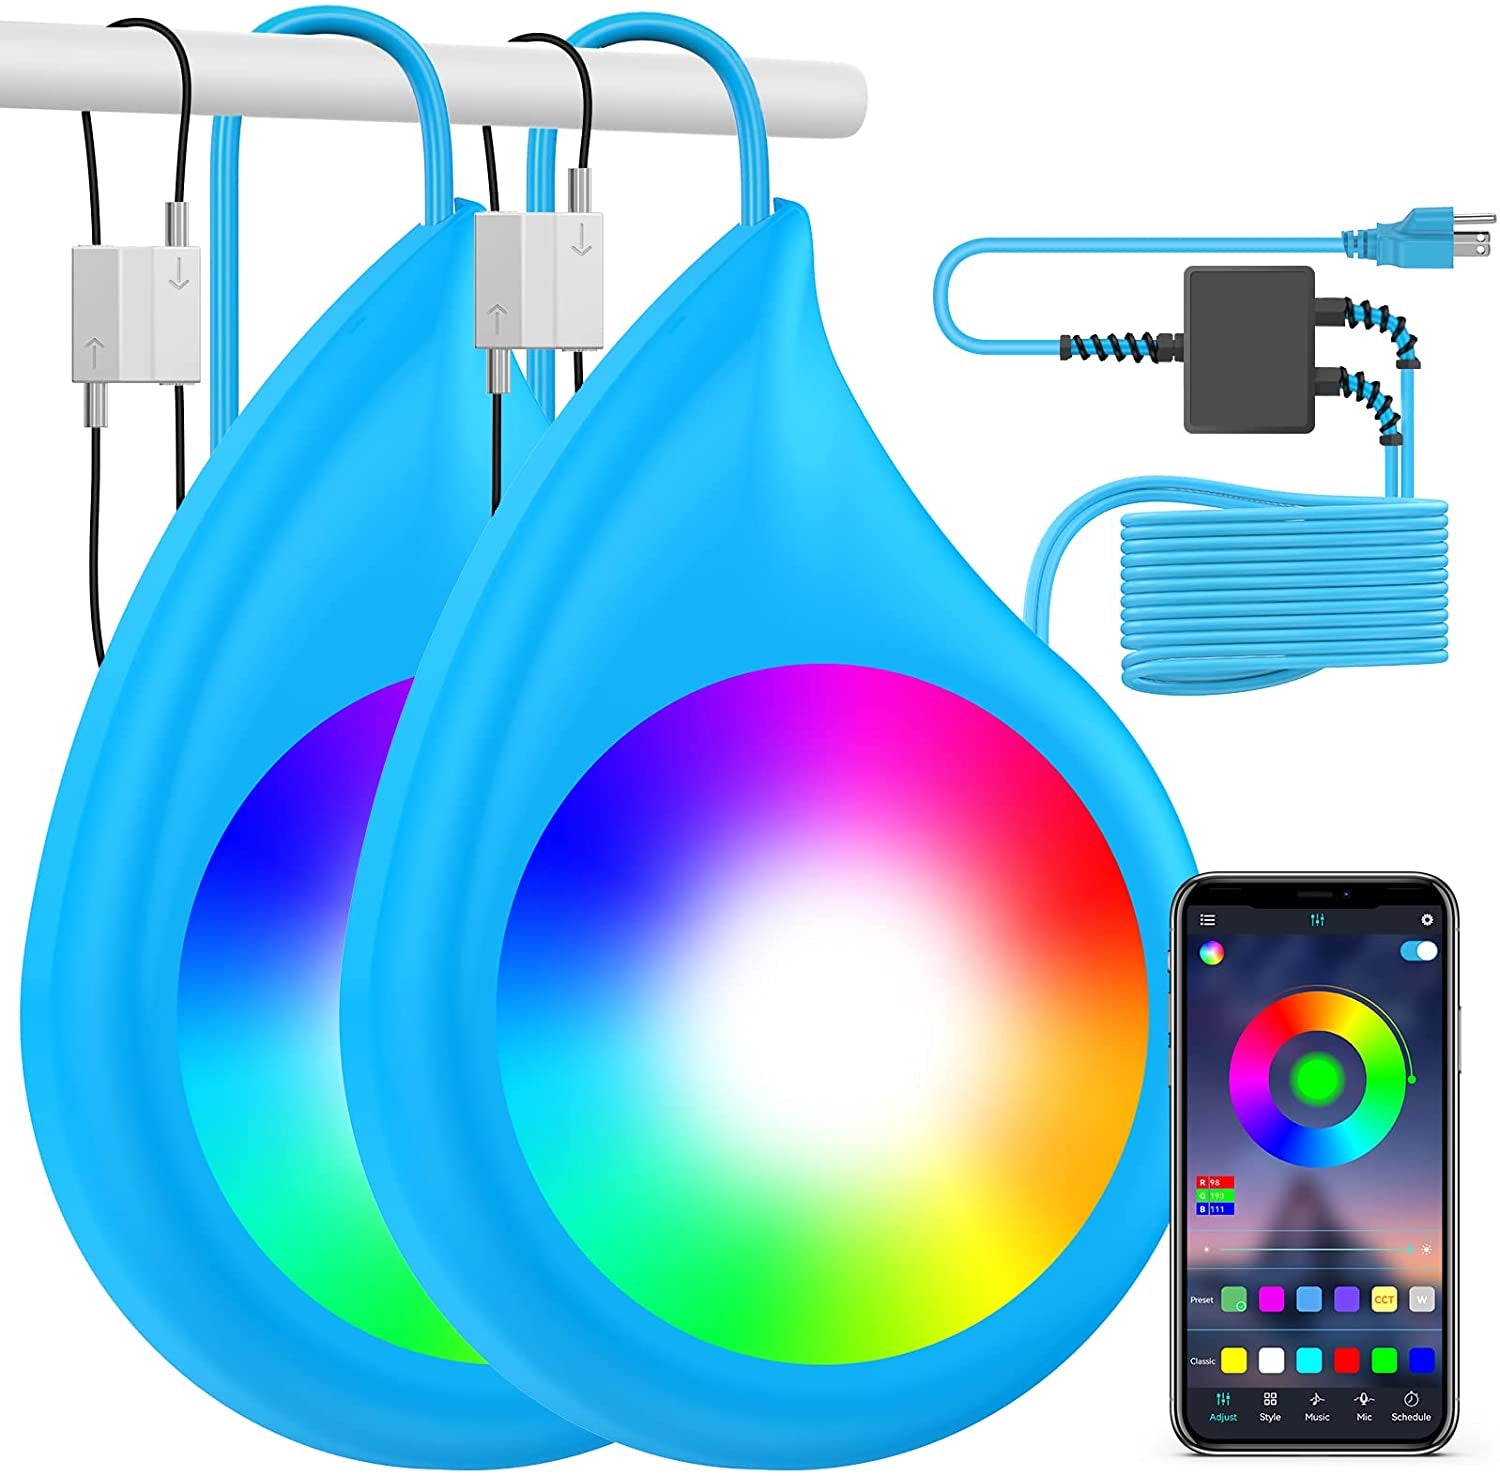 LyLmLe, Lylmle LED Pool Lights for Aboveground Pool, 20W Hanging RGB Color Changing Dimmable Underwater Submersible Lights with APP Control, Compatible for Steel Frame Pool, IP68 Waterproof,26Ft Cord,12V